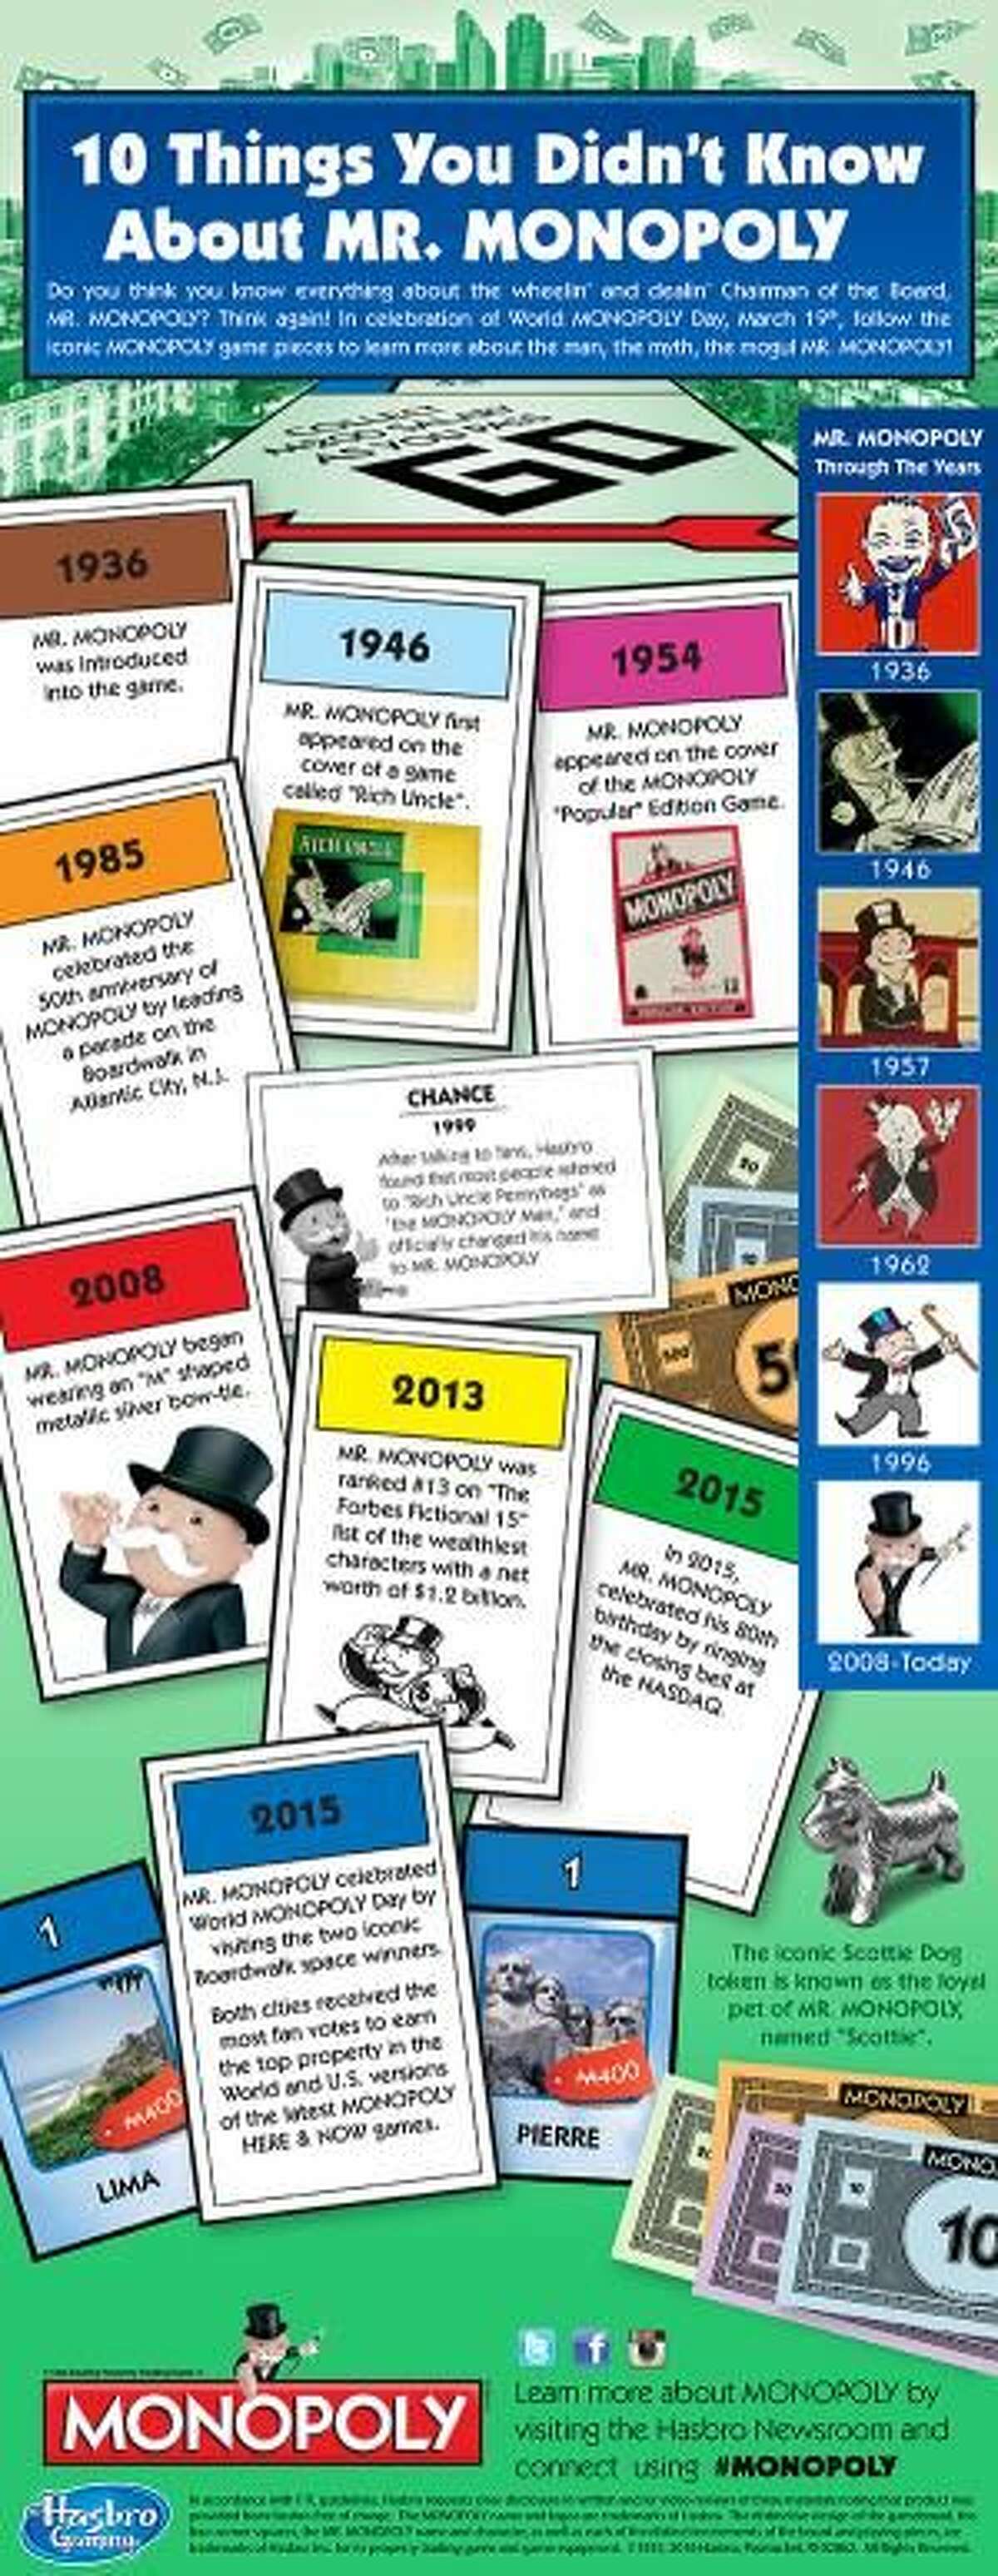 Fun Facts about Mr. Monopoly for World Monopoly Day